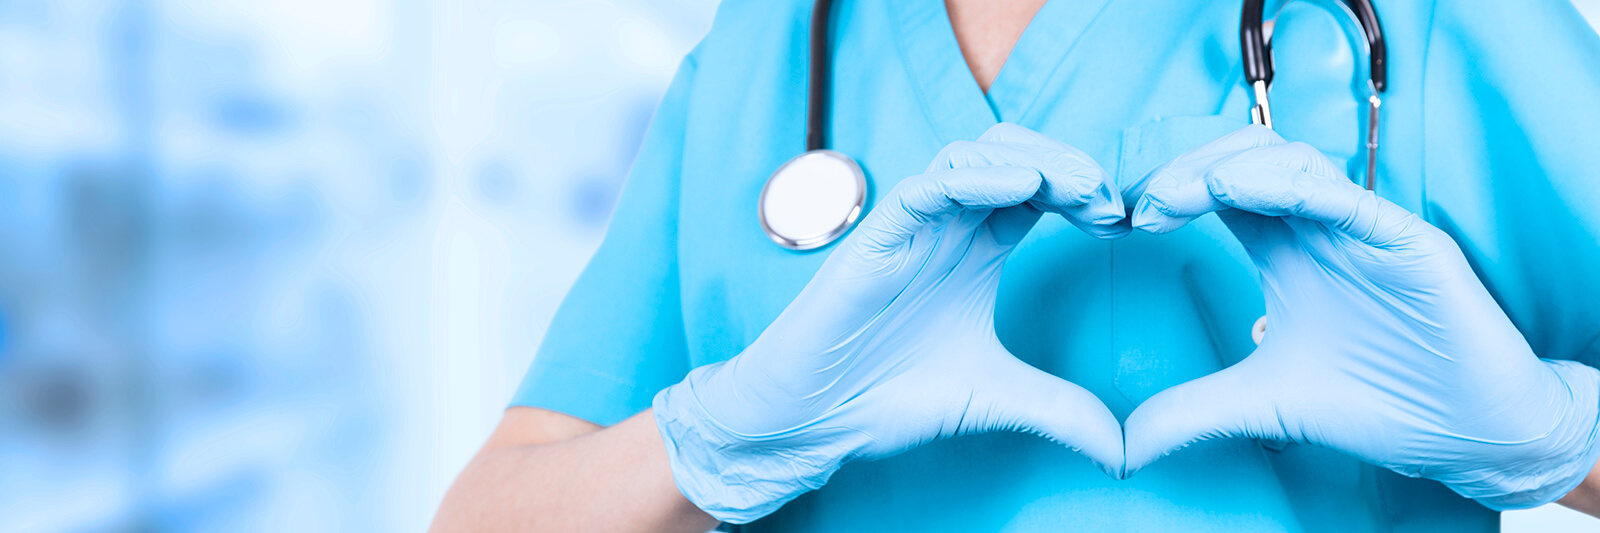 Doctor woman, hands in medical blue gloves, making a heart shape.